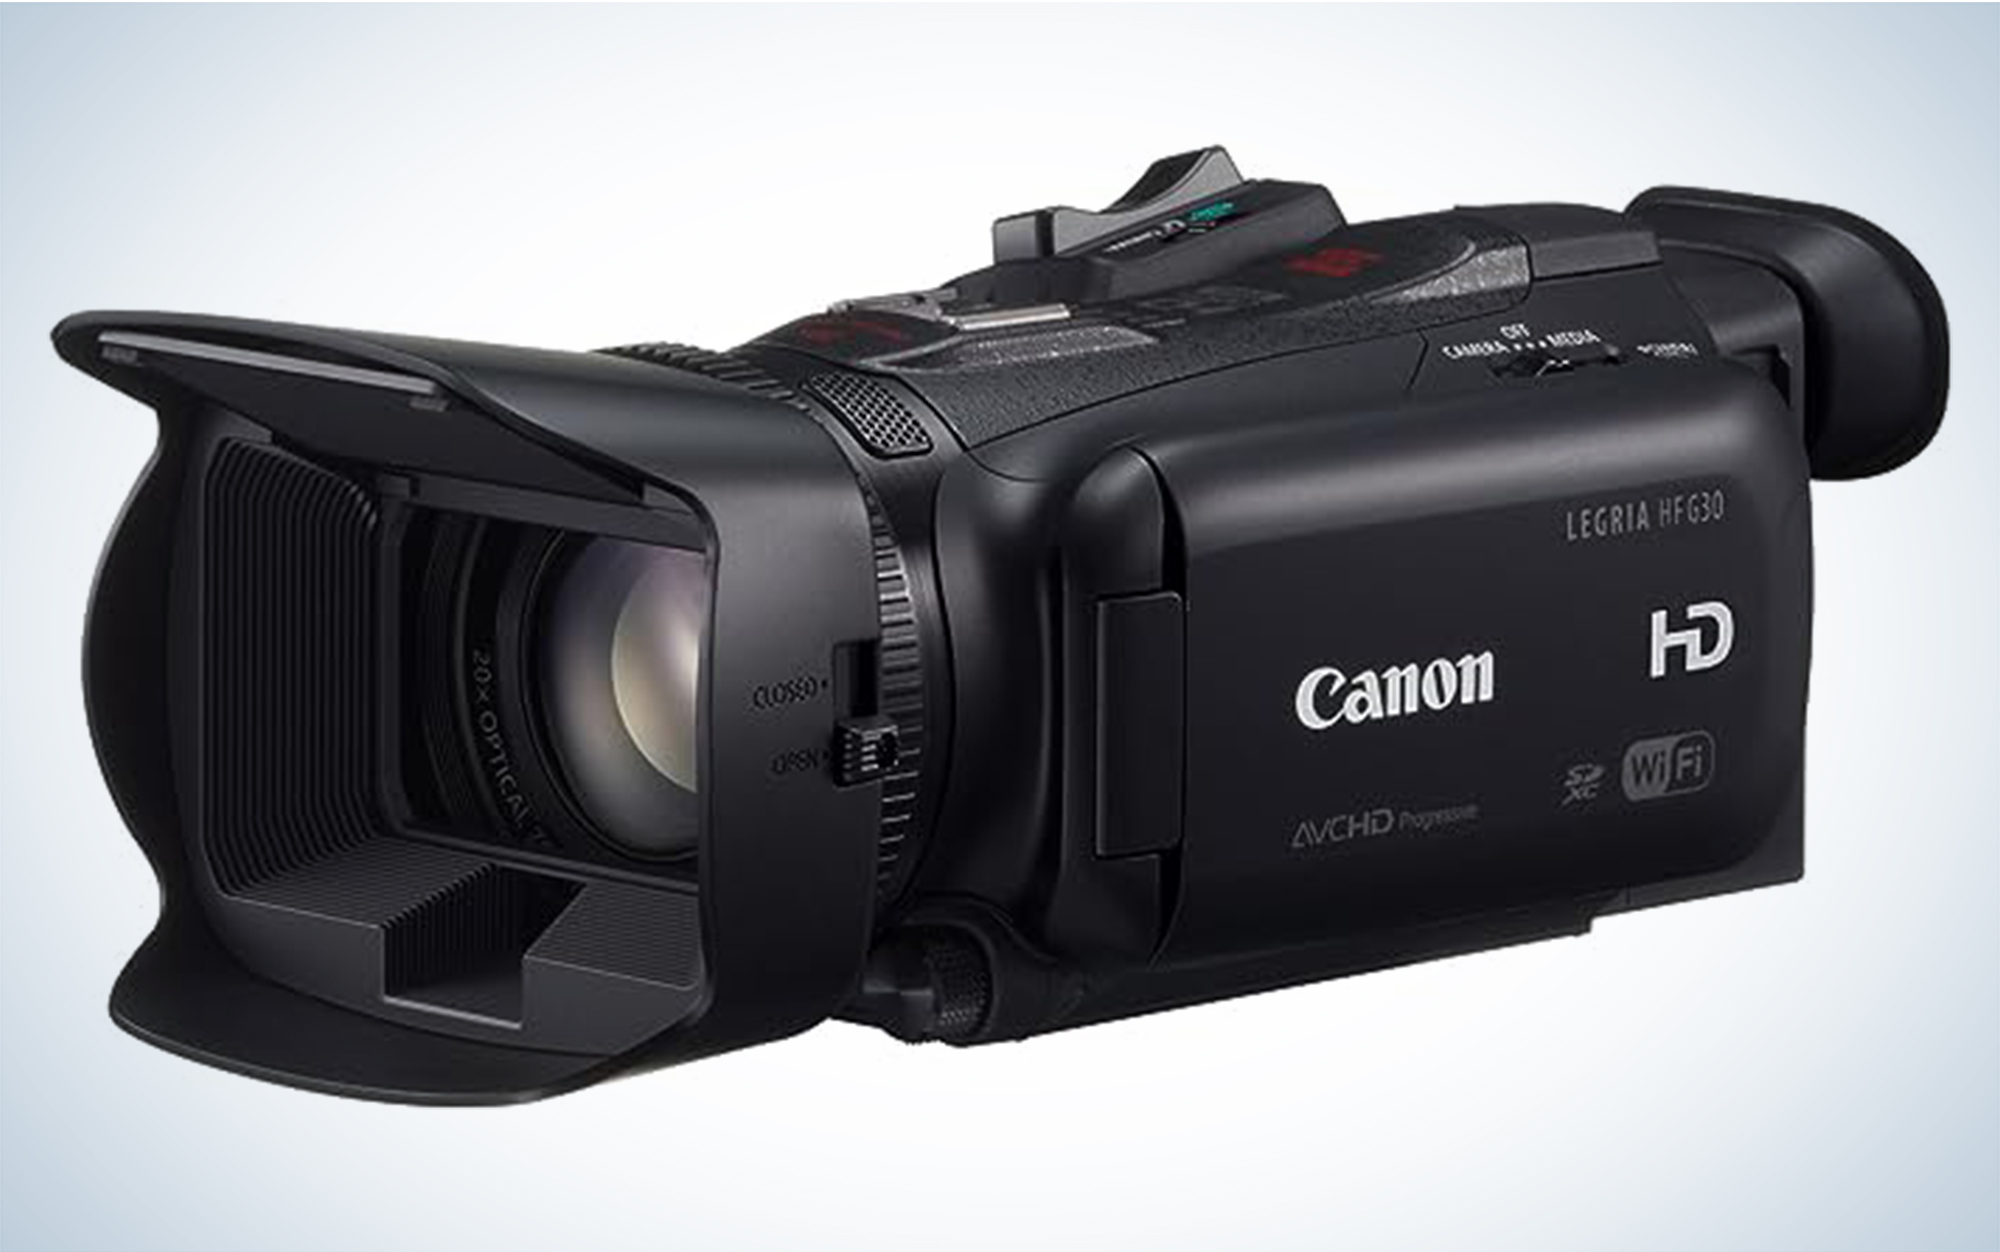 The Canon G30 is the best value.